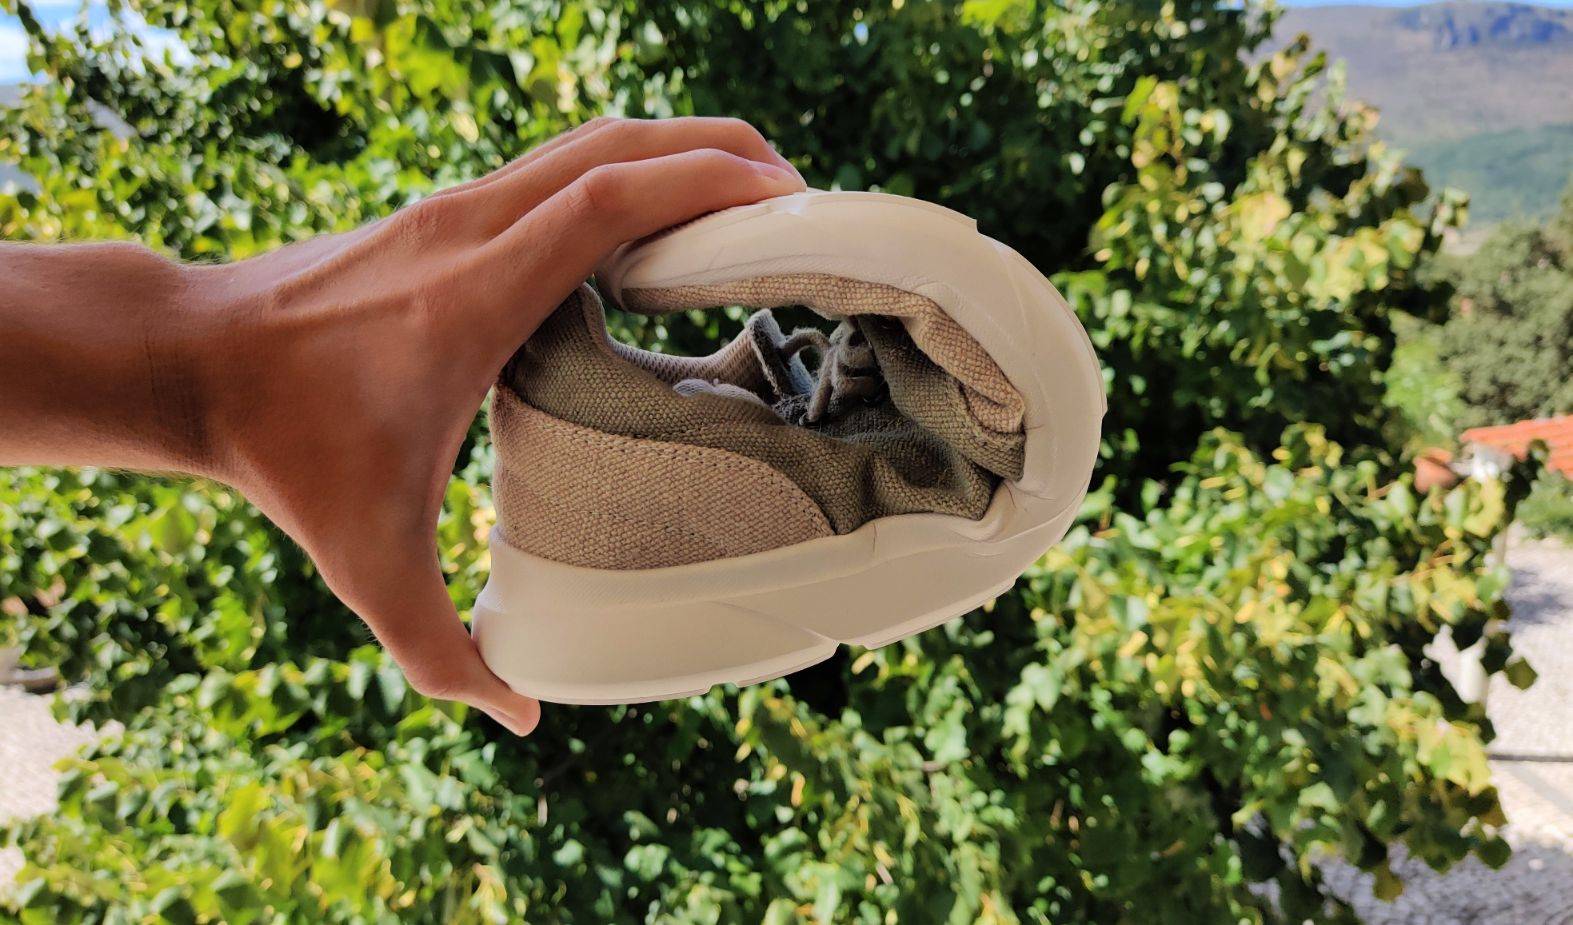 8000Kicks Sustainable Shoes are also flexible